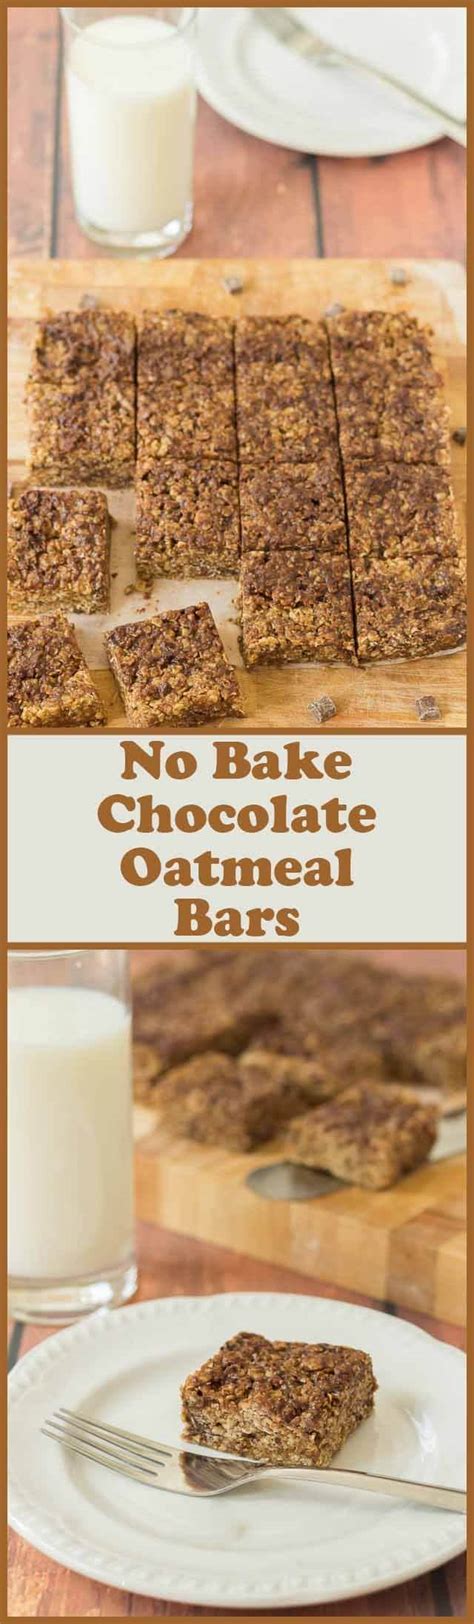 Pour into a greased 9×13 pan and cool in the fridge. No Bake Chocolate Oatmeal Bars - Neils Healthy Meals